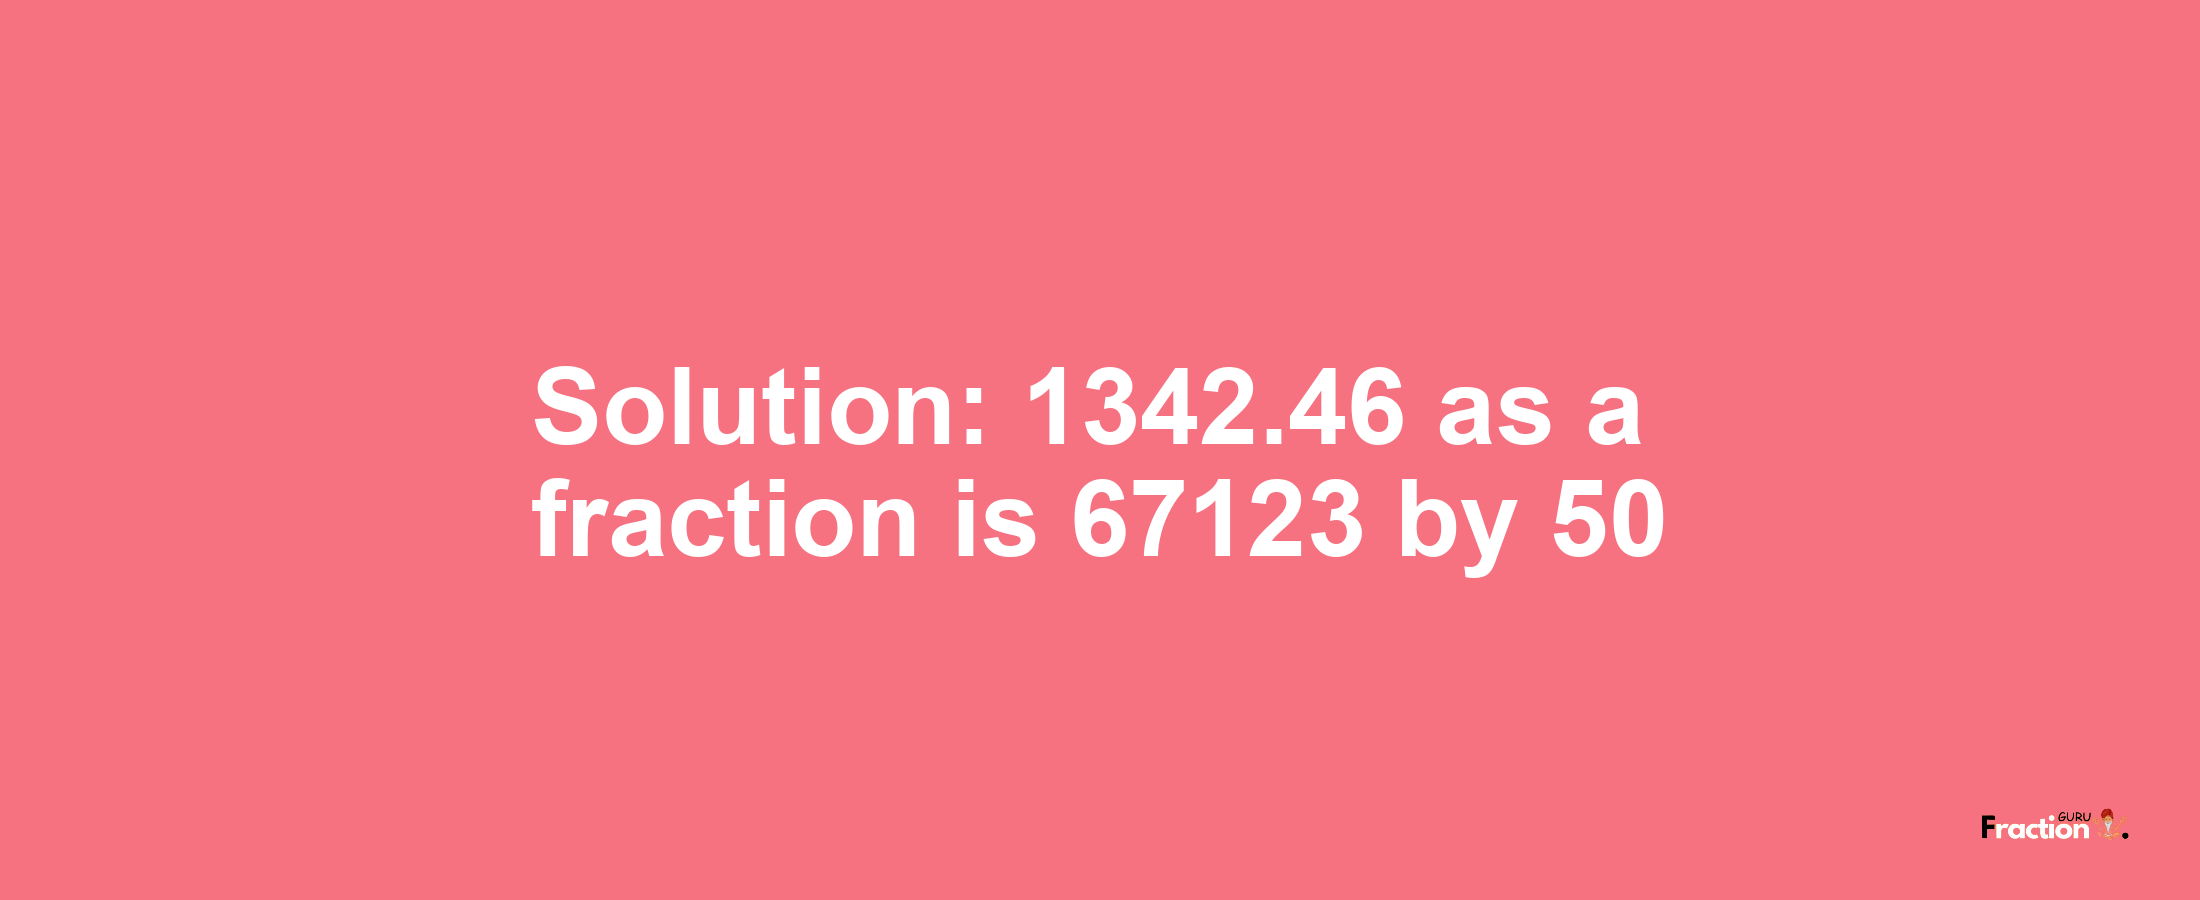 Solution:1342.46 as a fraction is 67123/50